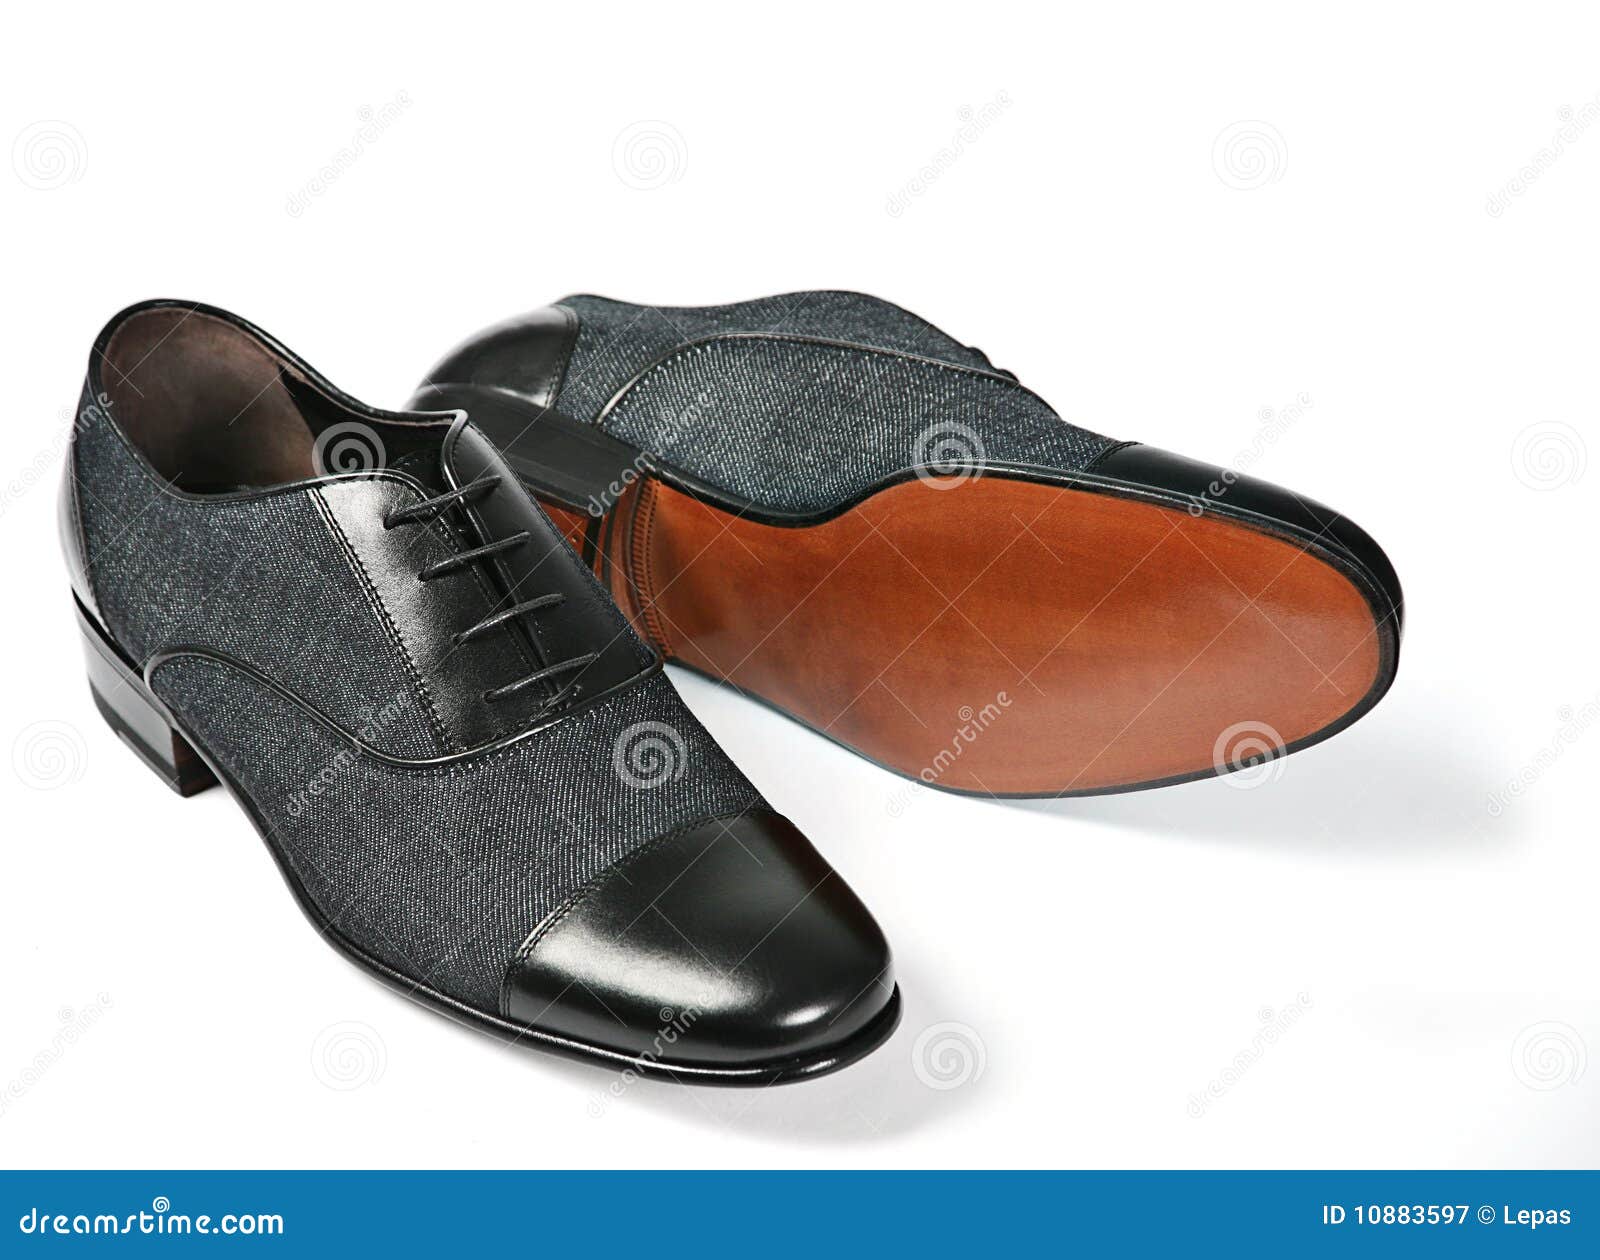 Black shoes stock image. Image of isolated, textile, accessory - 10883597